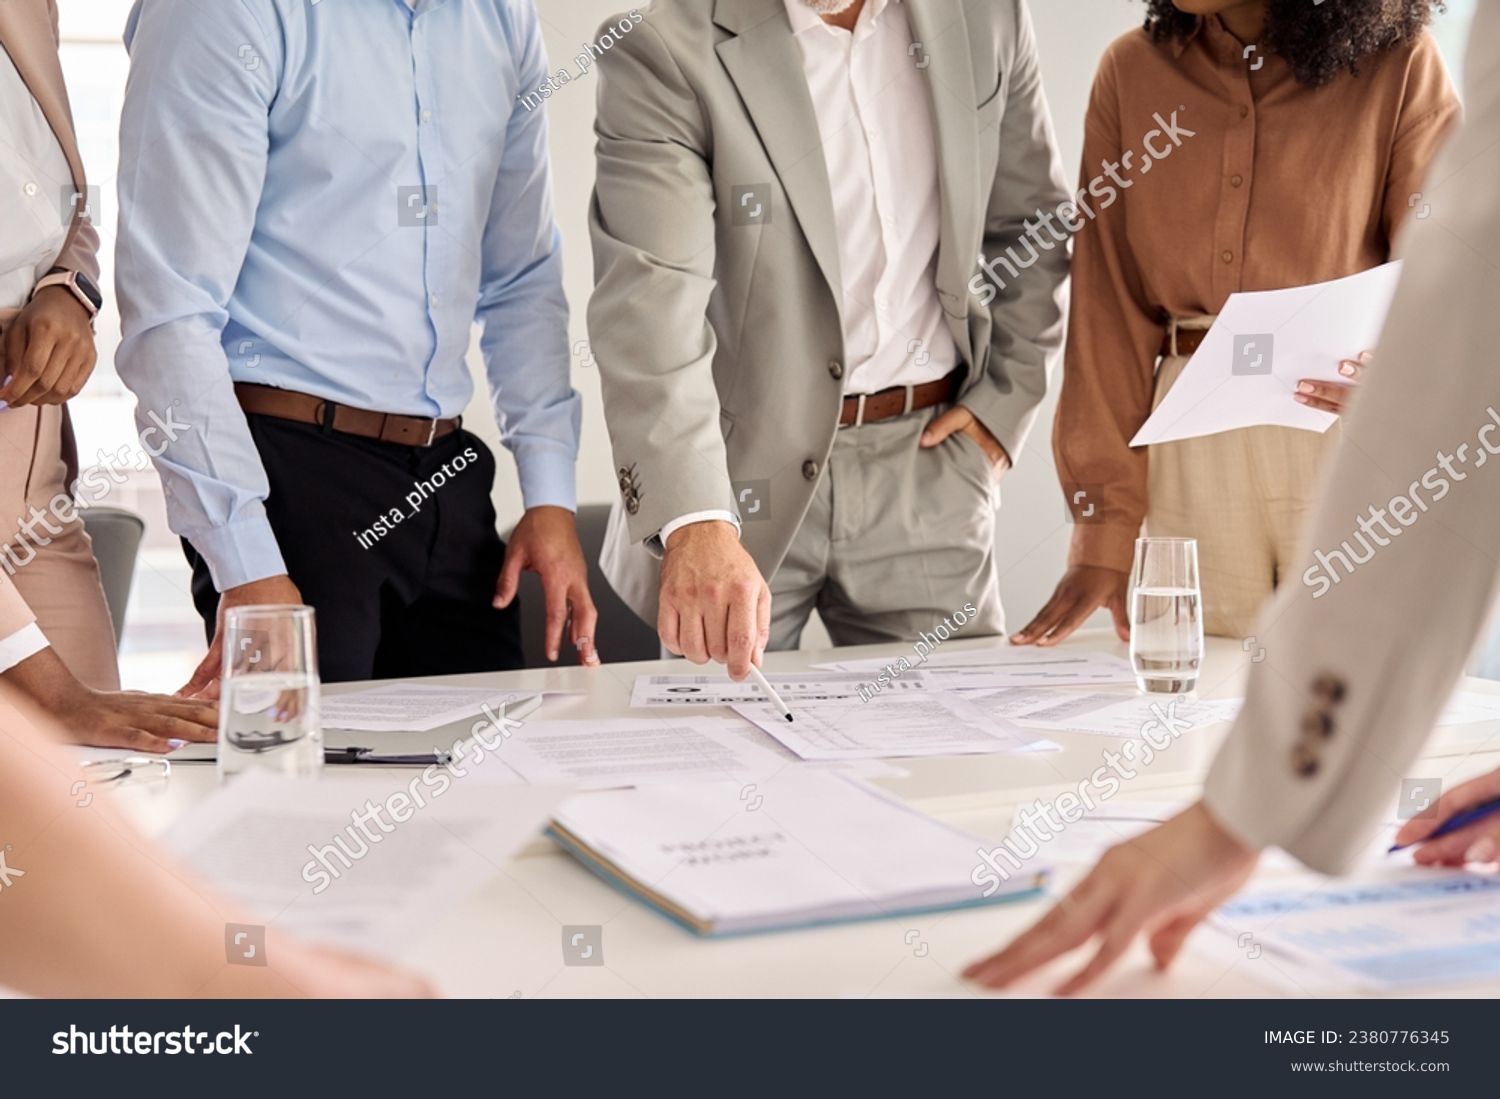 Executive business team people group working with paperwork standing at table, analyzing corporate strategy concept, reviewing plan, managing financial project overview at office meeting, close up. #2380776345